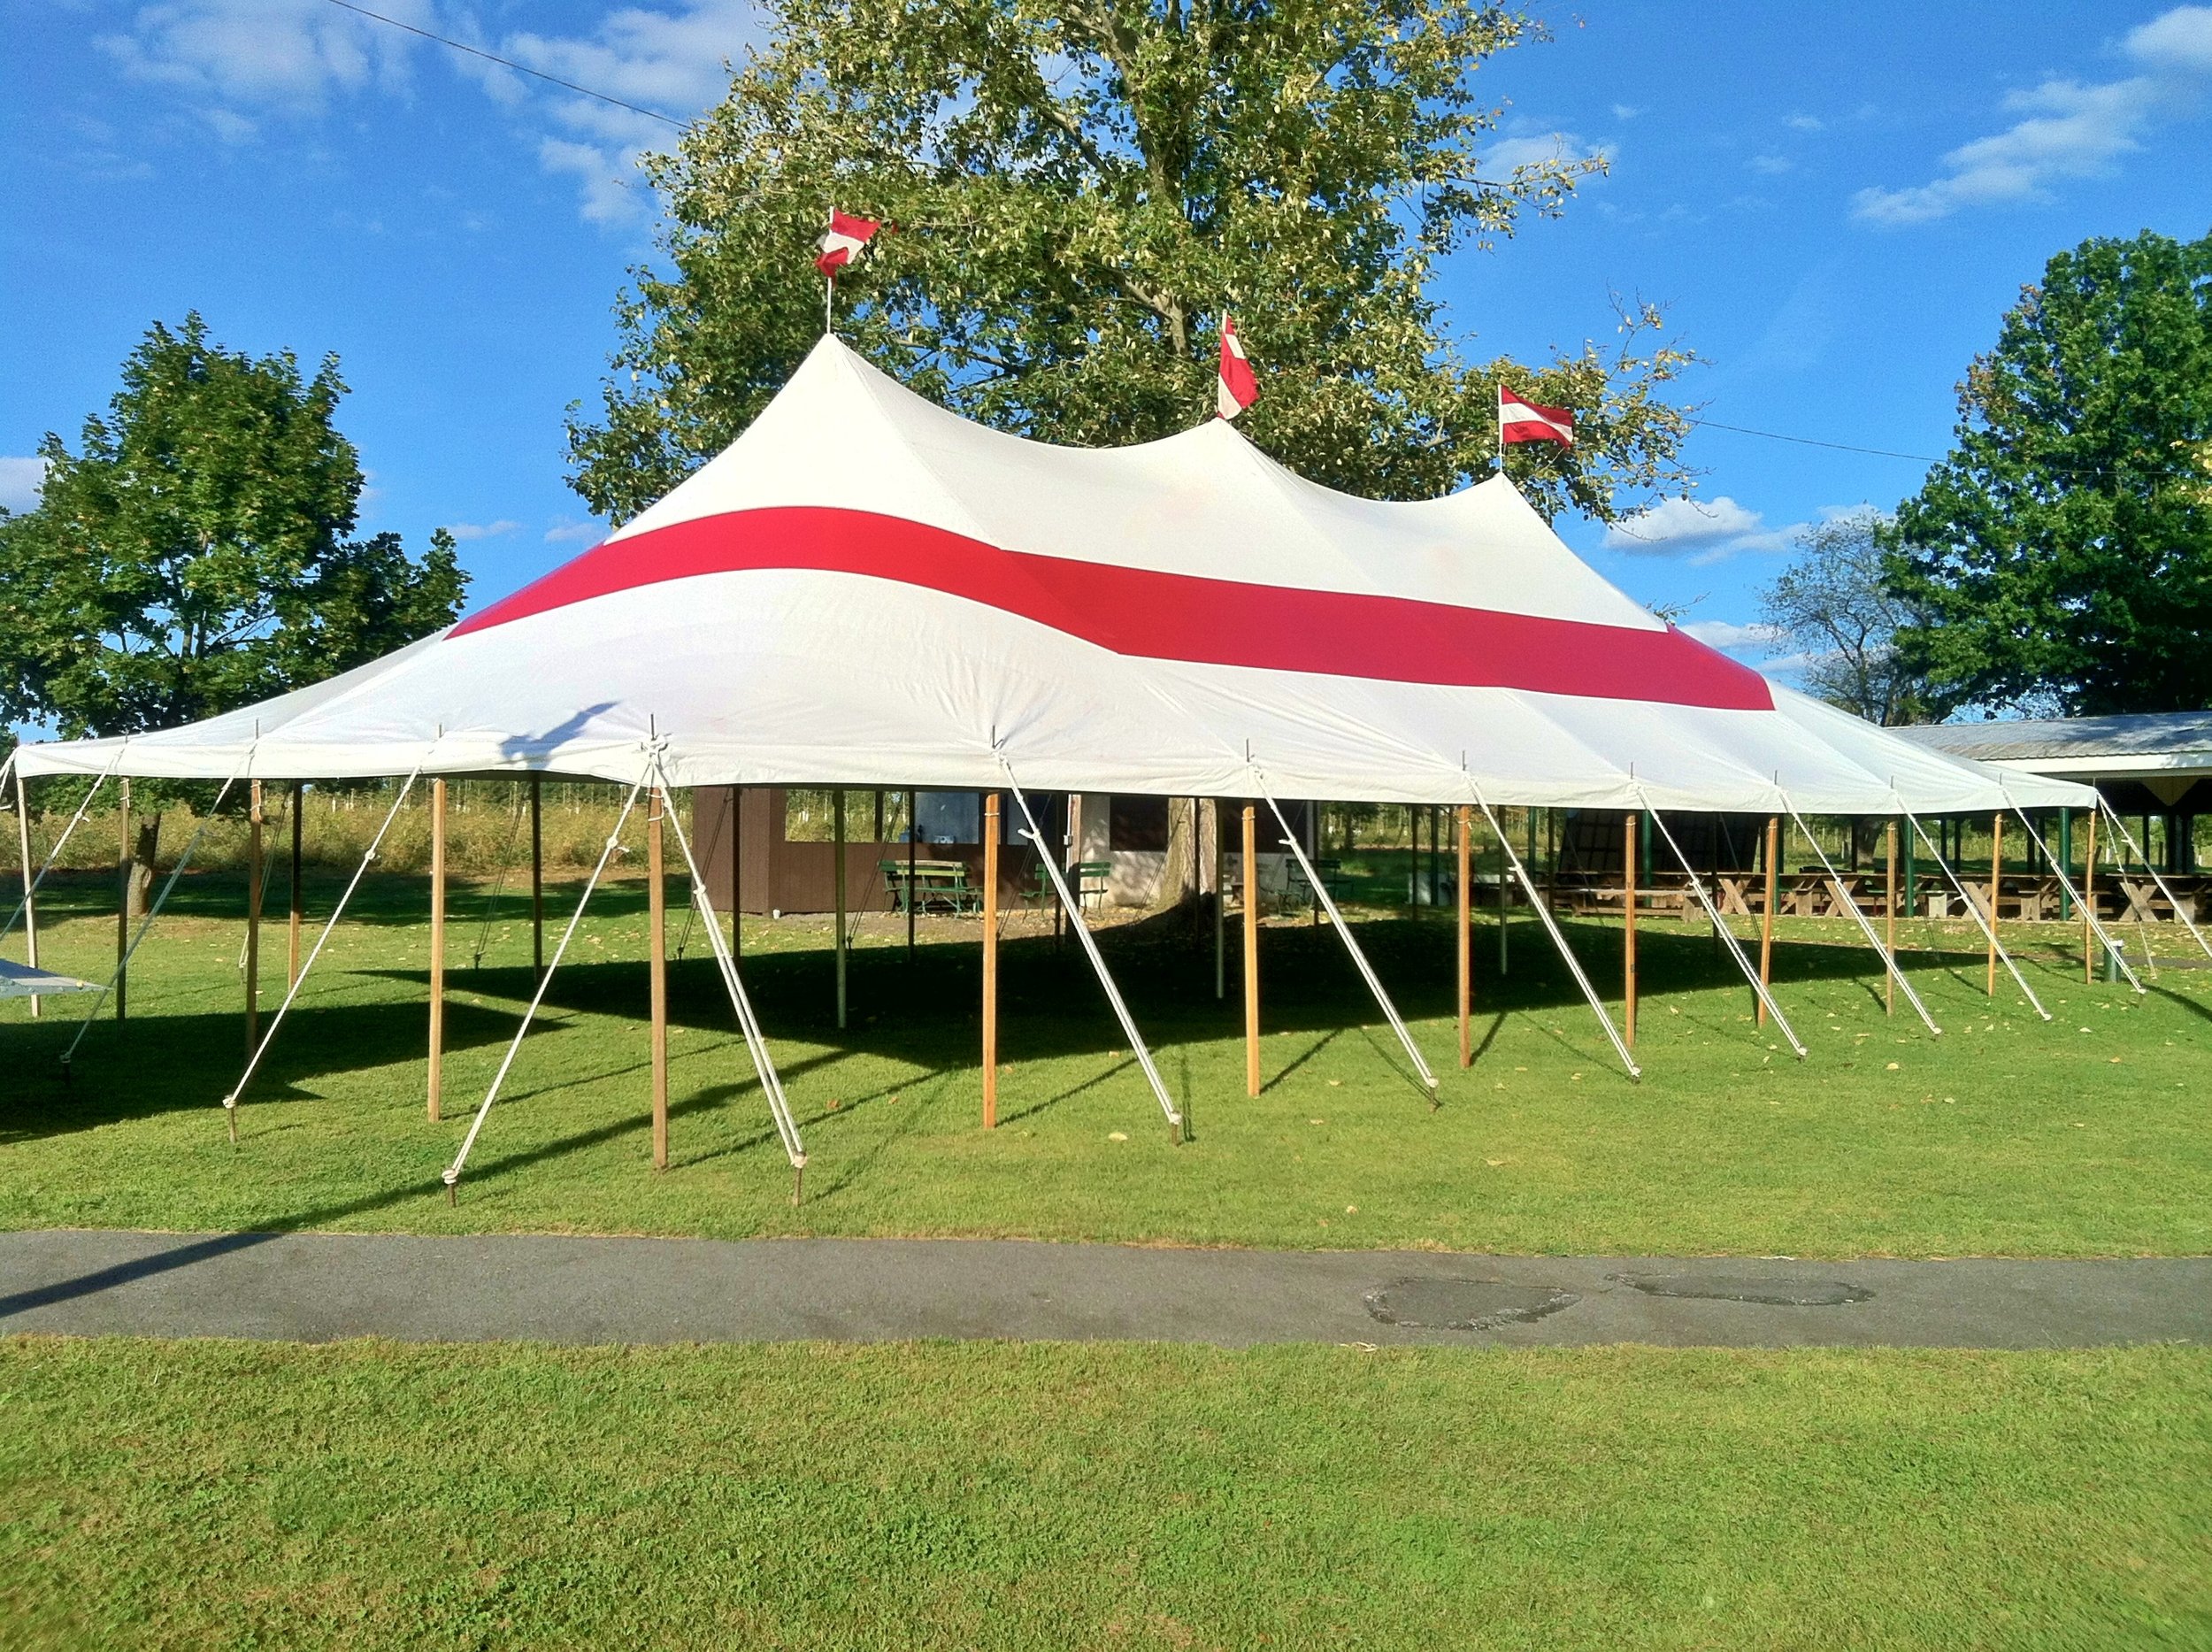 30x60 red and white striped colored tent